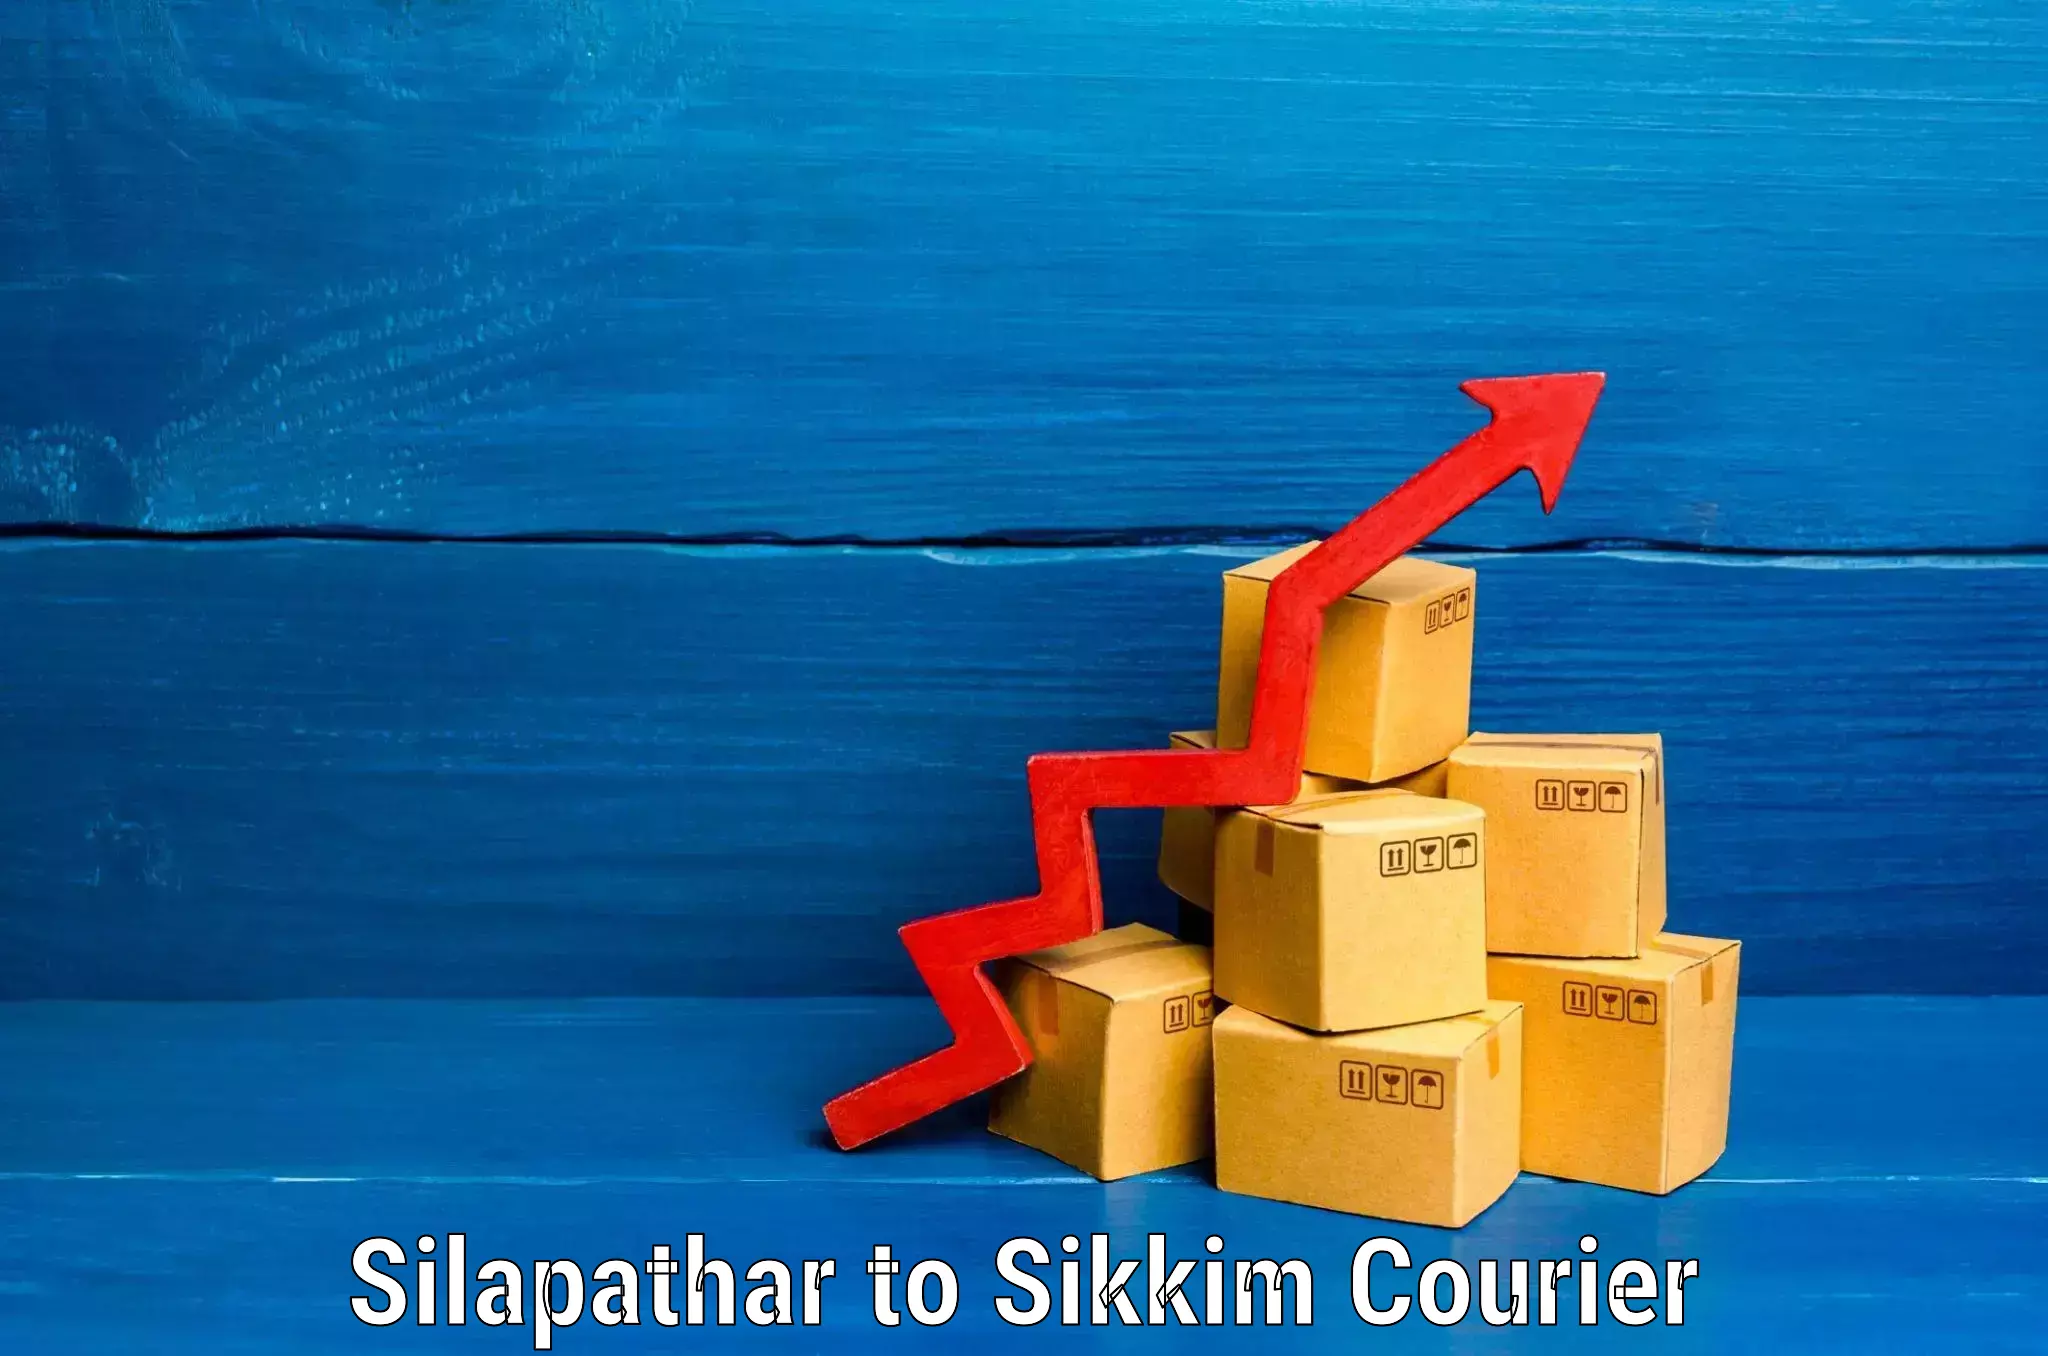 Luggage transport deals Silapathar to Sikkim